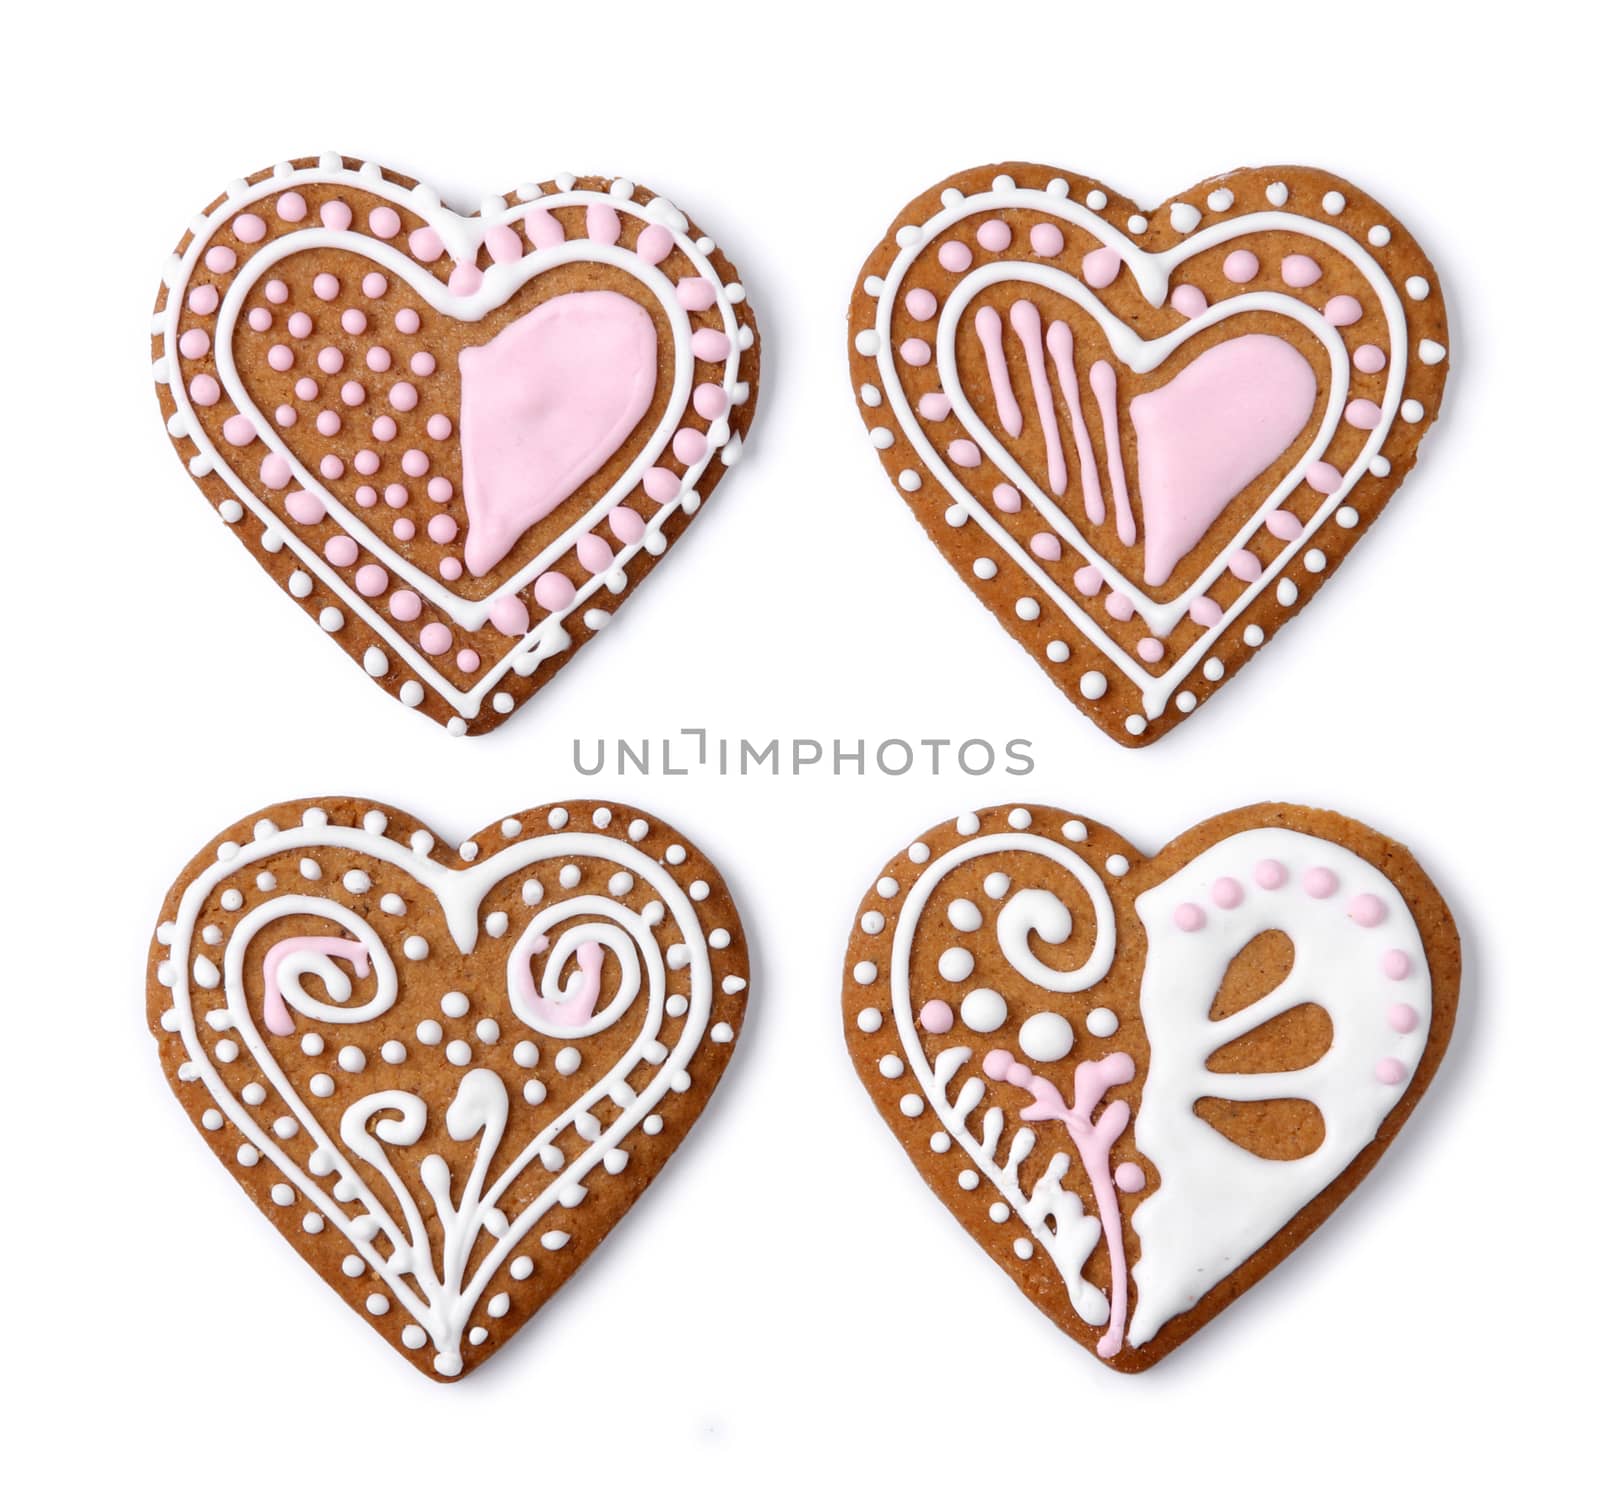 Home made gingerbread heart cookies by anterovium